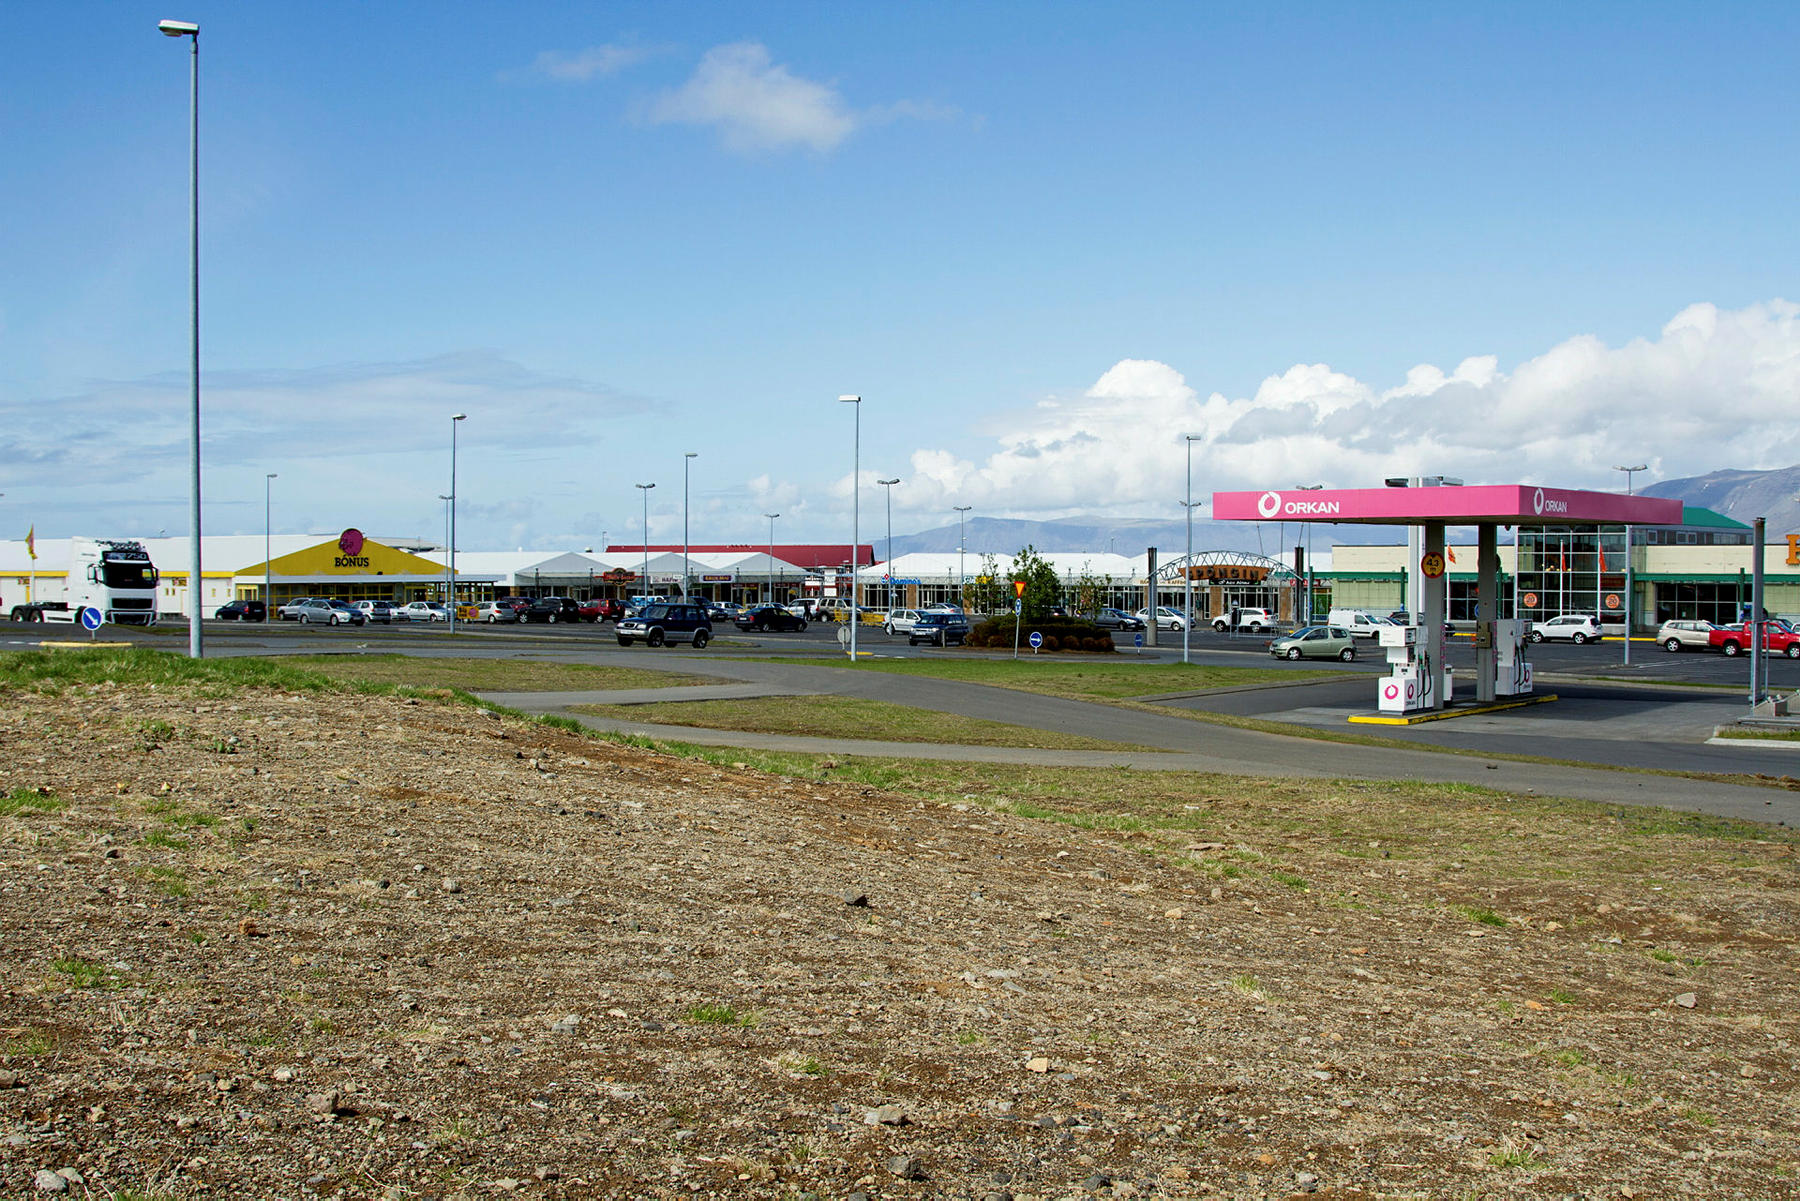 Reykjavík to reduce number of petrol stations by half in ...